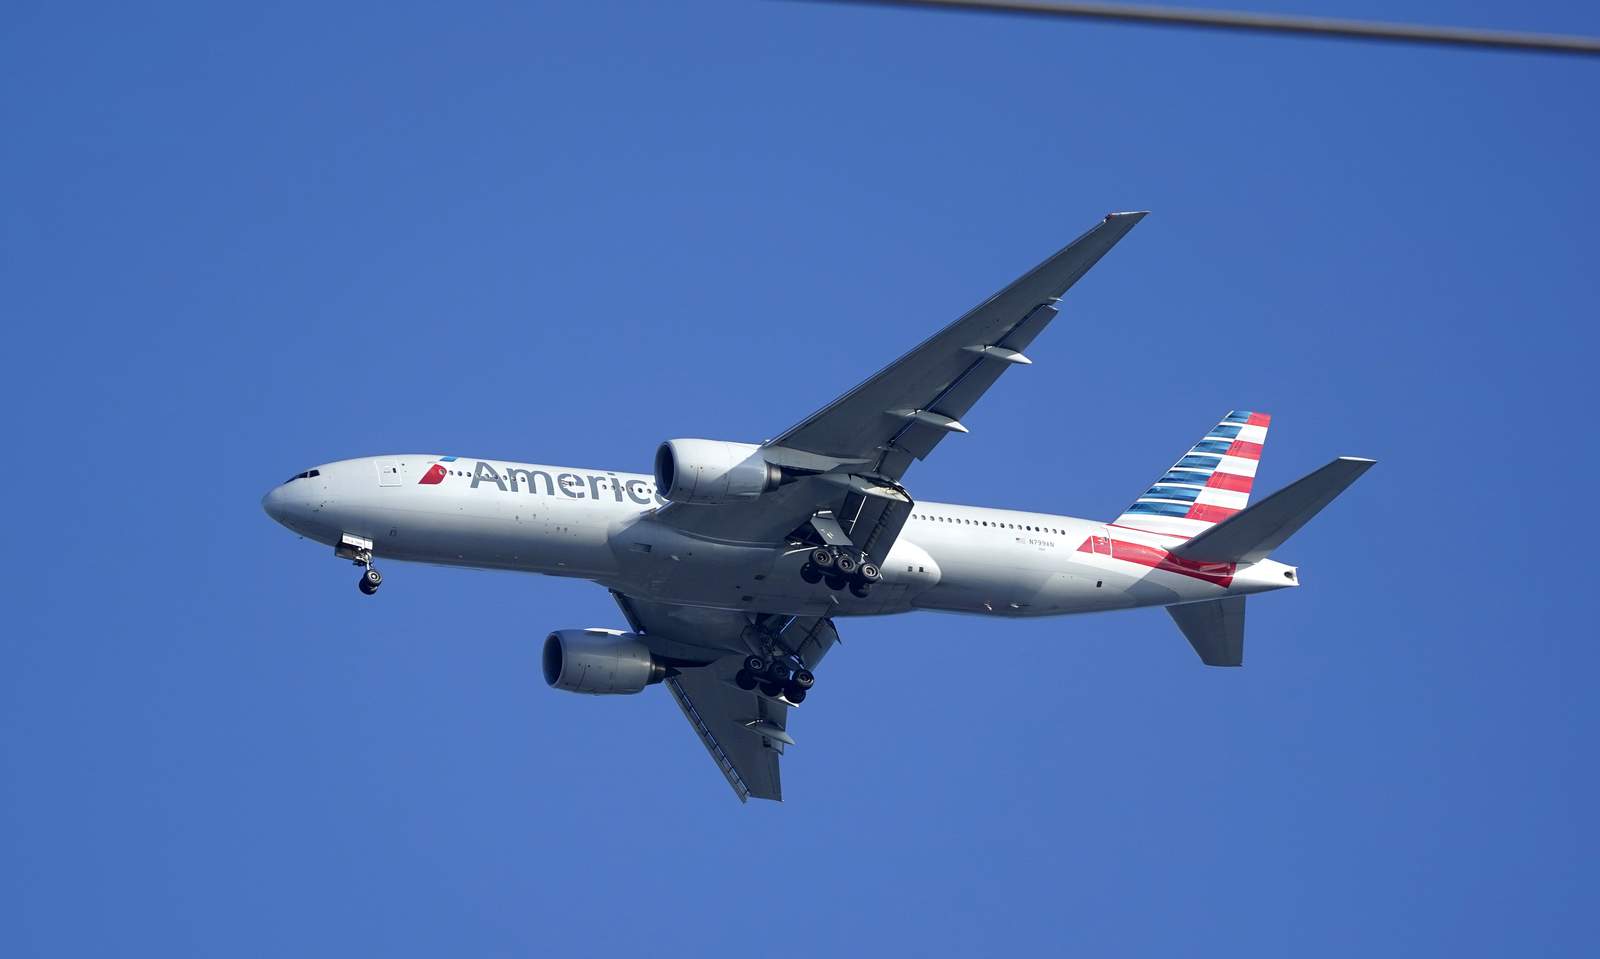 American Airlines lost $8.9 billion in a year of pandemic